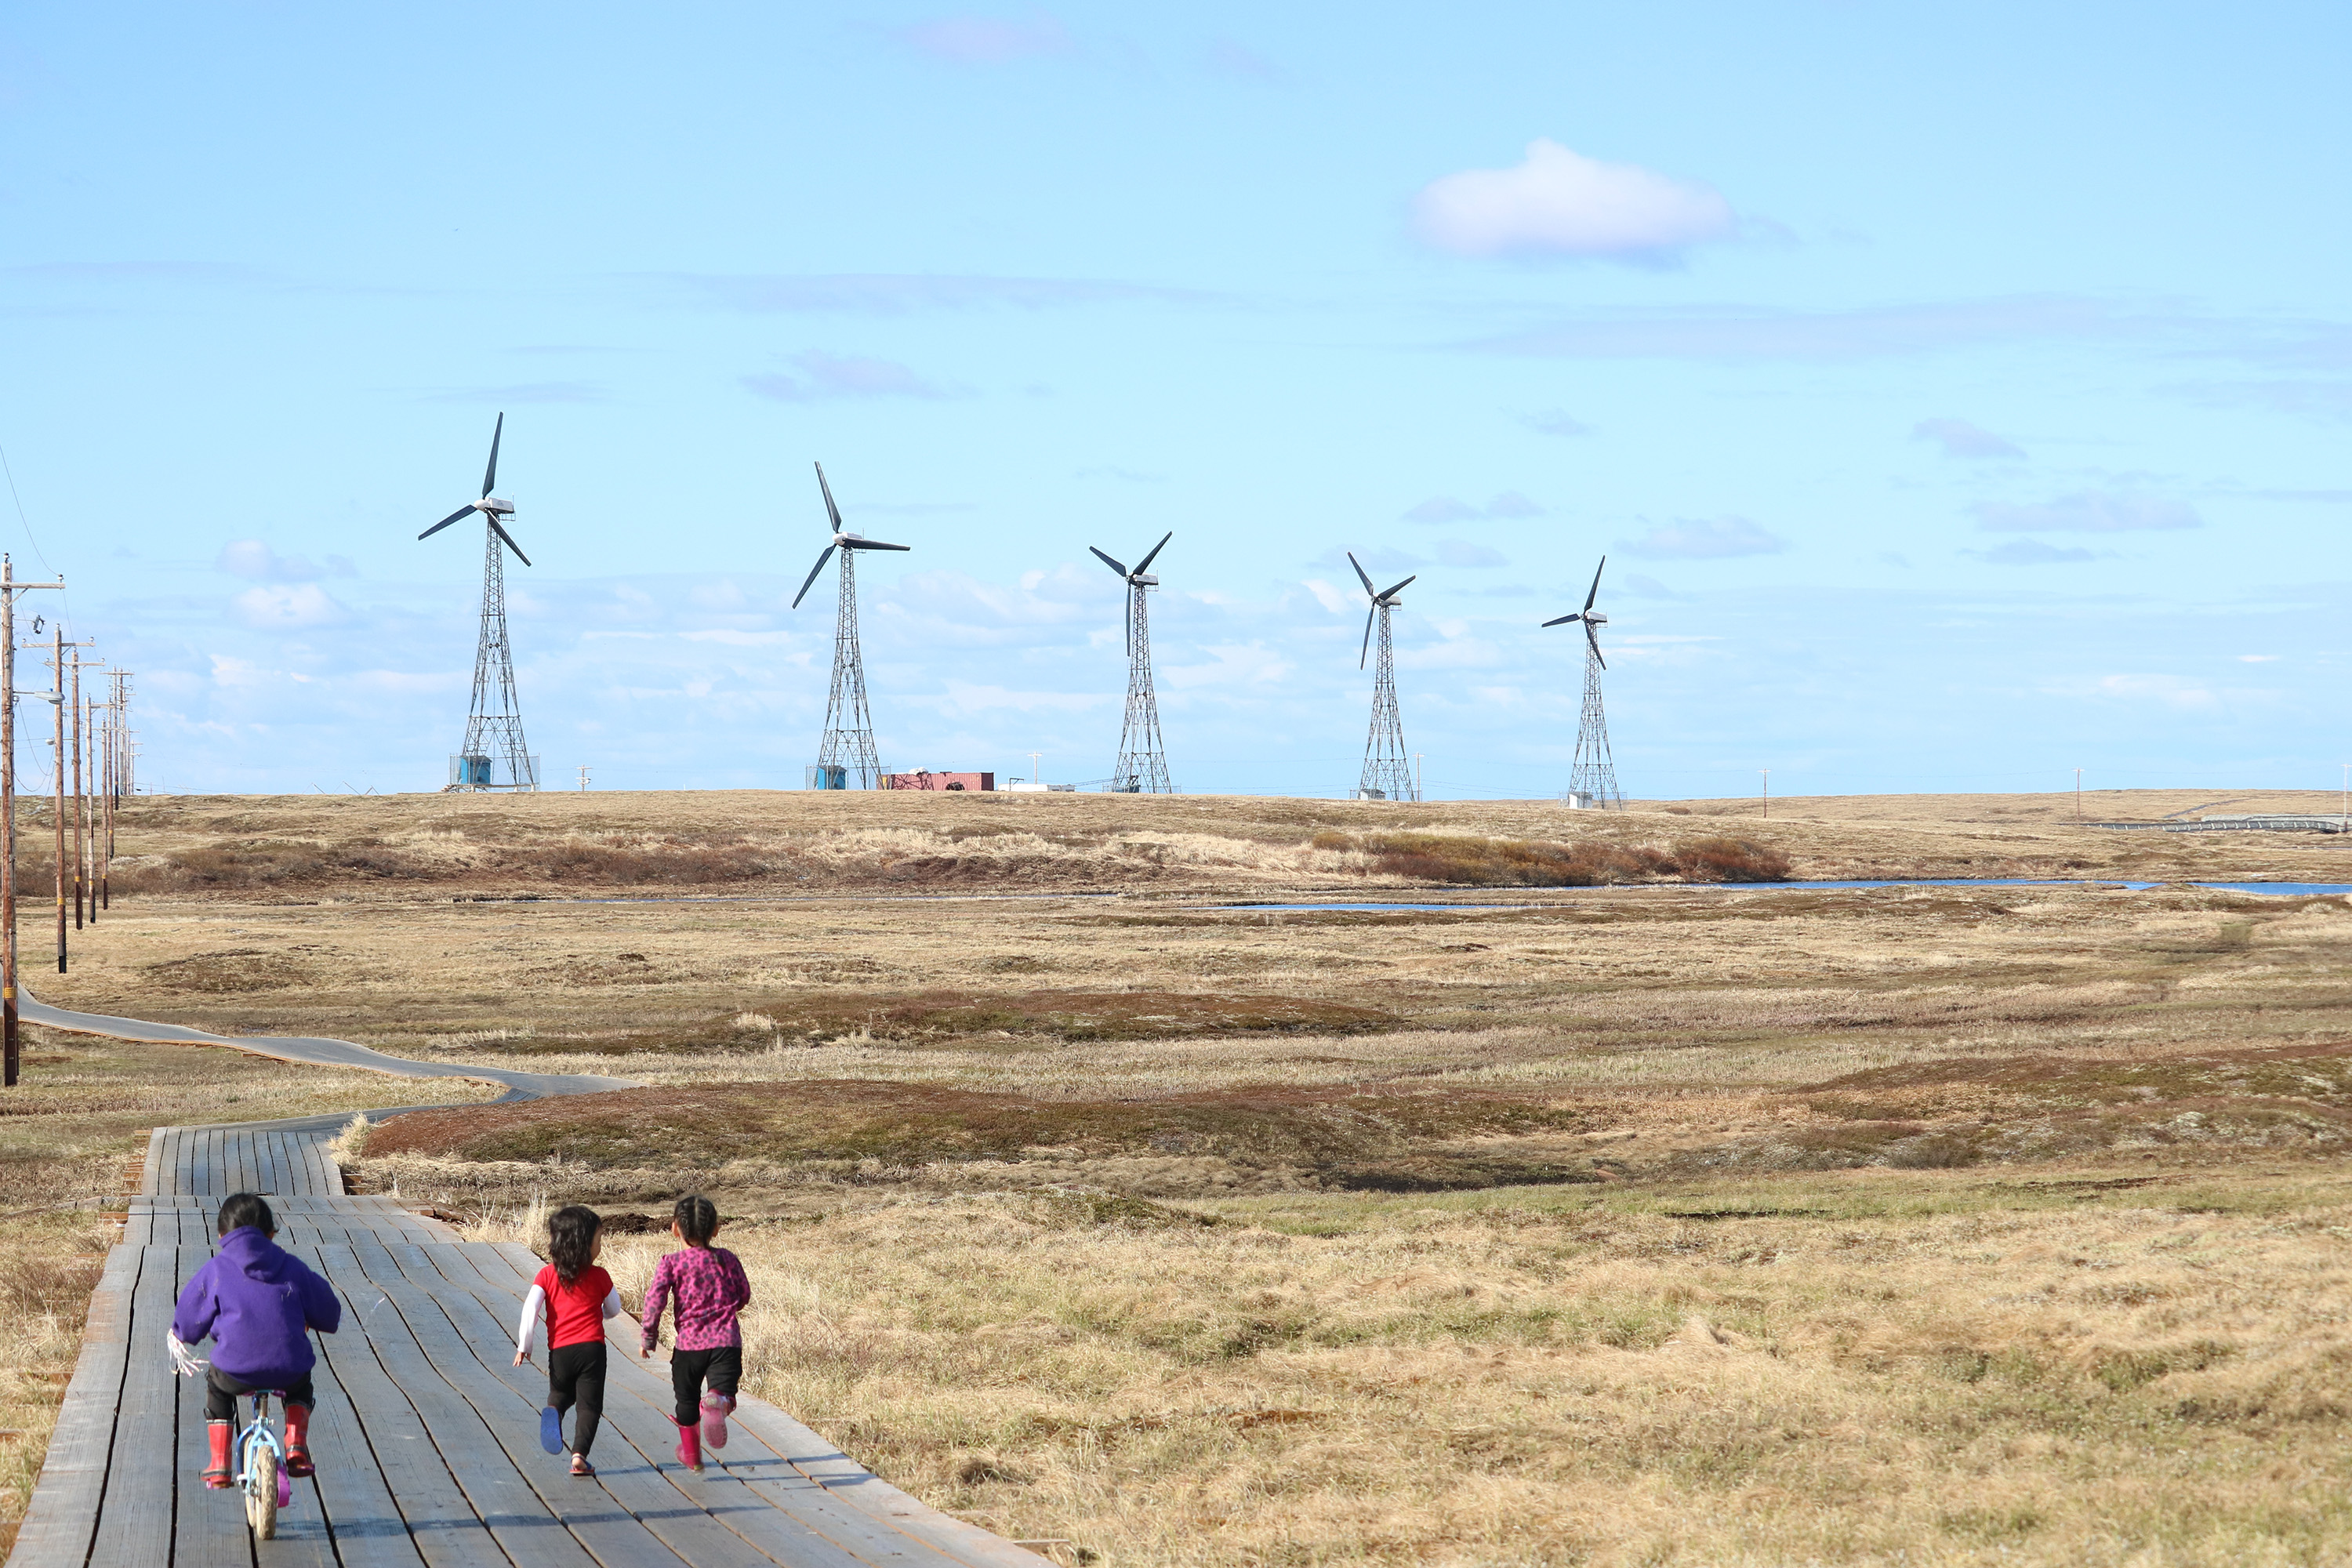 Children run along a boardwalk in the village of Kongiganak with the community’s 475 kw wind farm in the distance